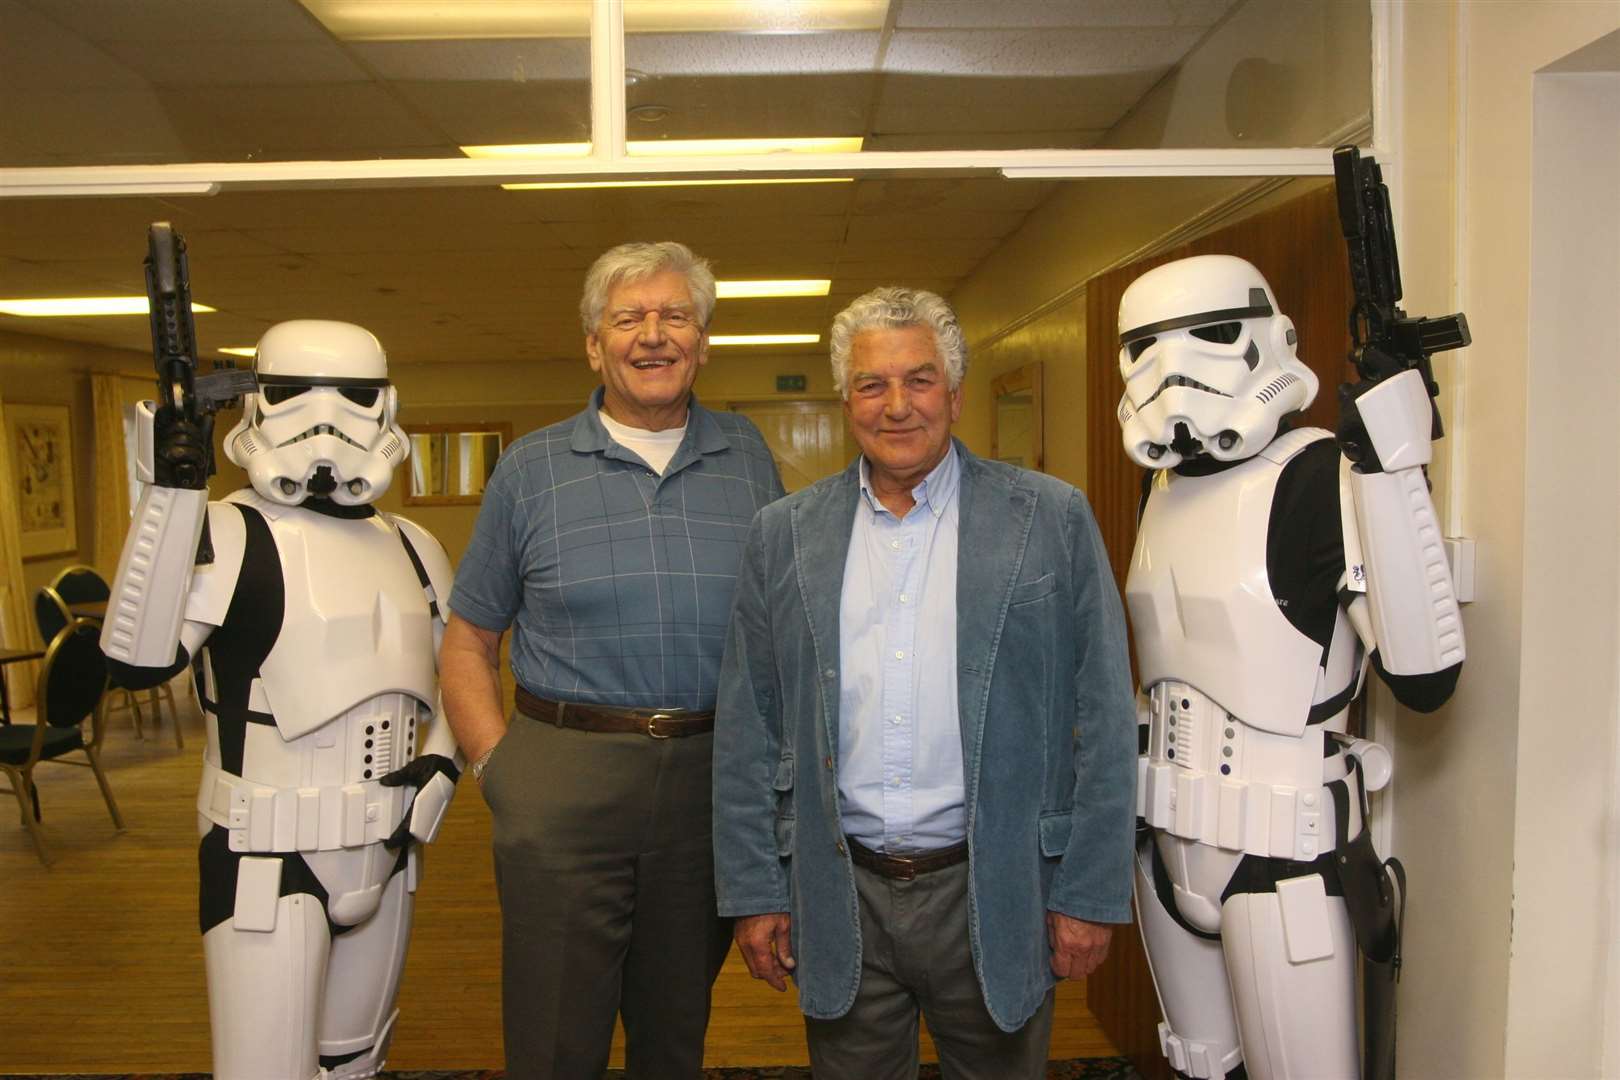 Dave Prowse, left who played Darth Vader and his brother, Bob Prowse, former owner of the Maidstone gym which bears his name, at Hawkhurst Golf Club